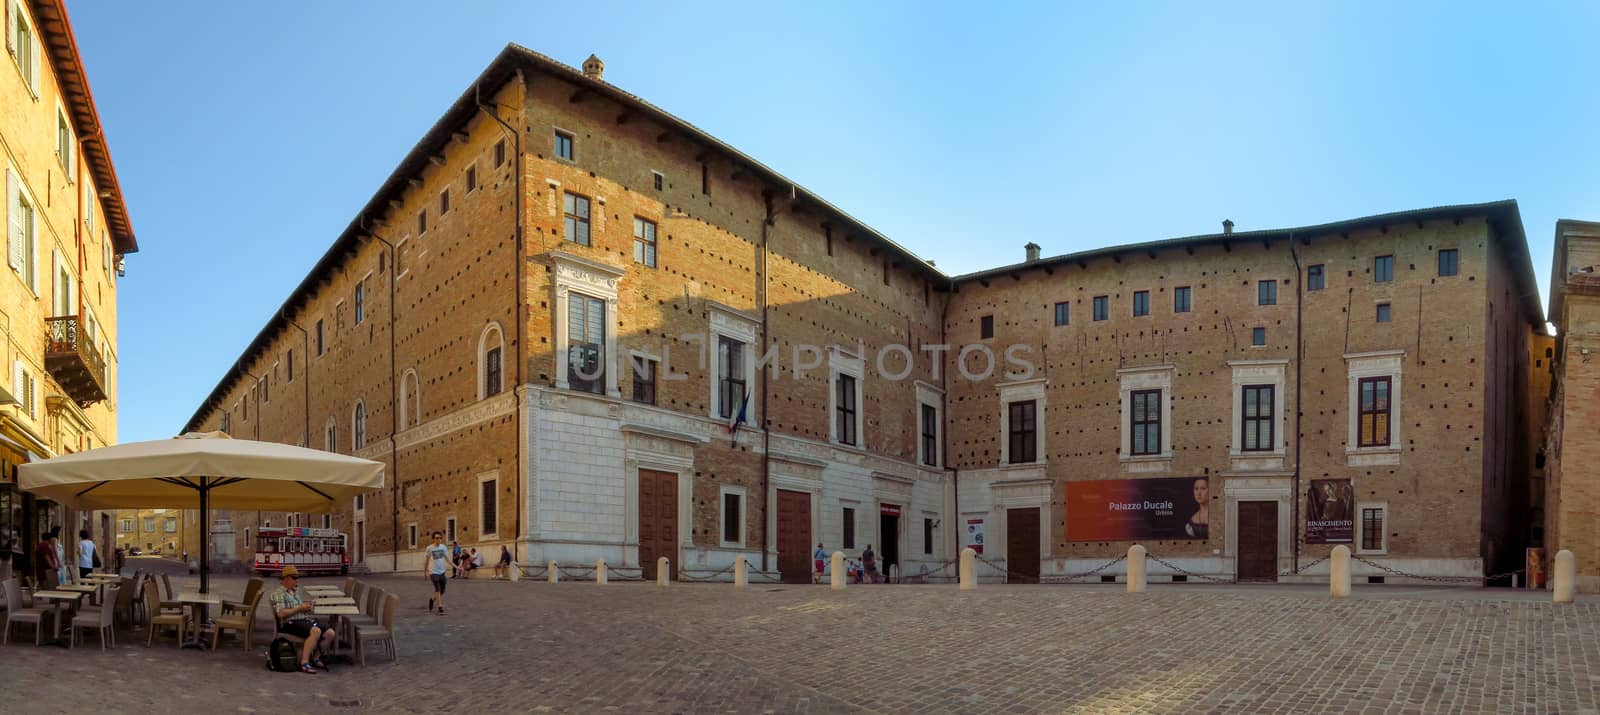 Urbino, Italy - June 24, 2017: View of buildings in the old city. Urbania was famous during the Renaissance as a country seat of the Dukes of Urbino.